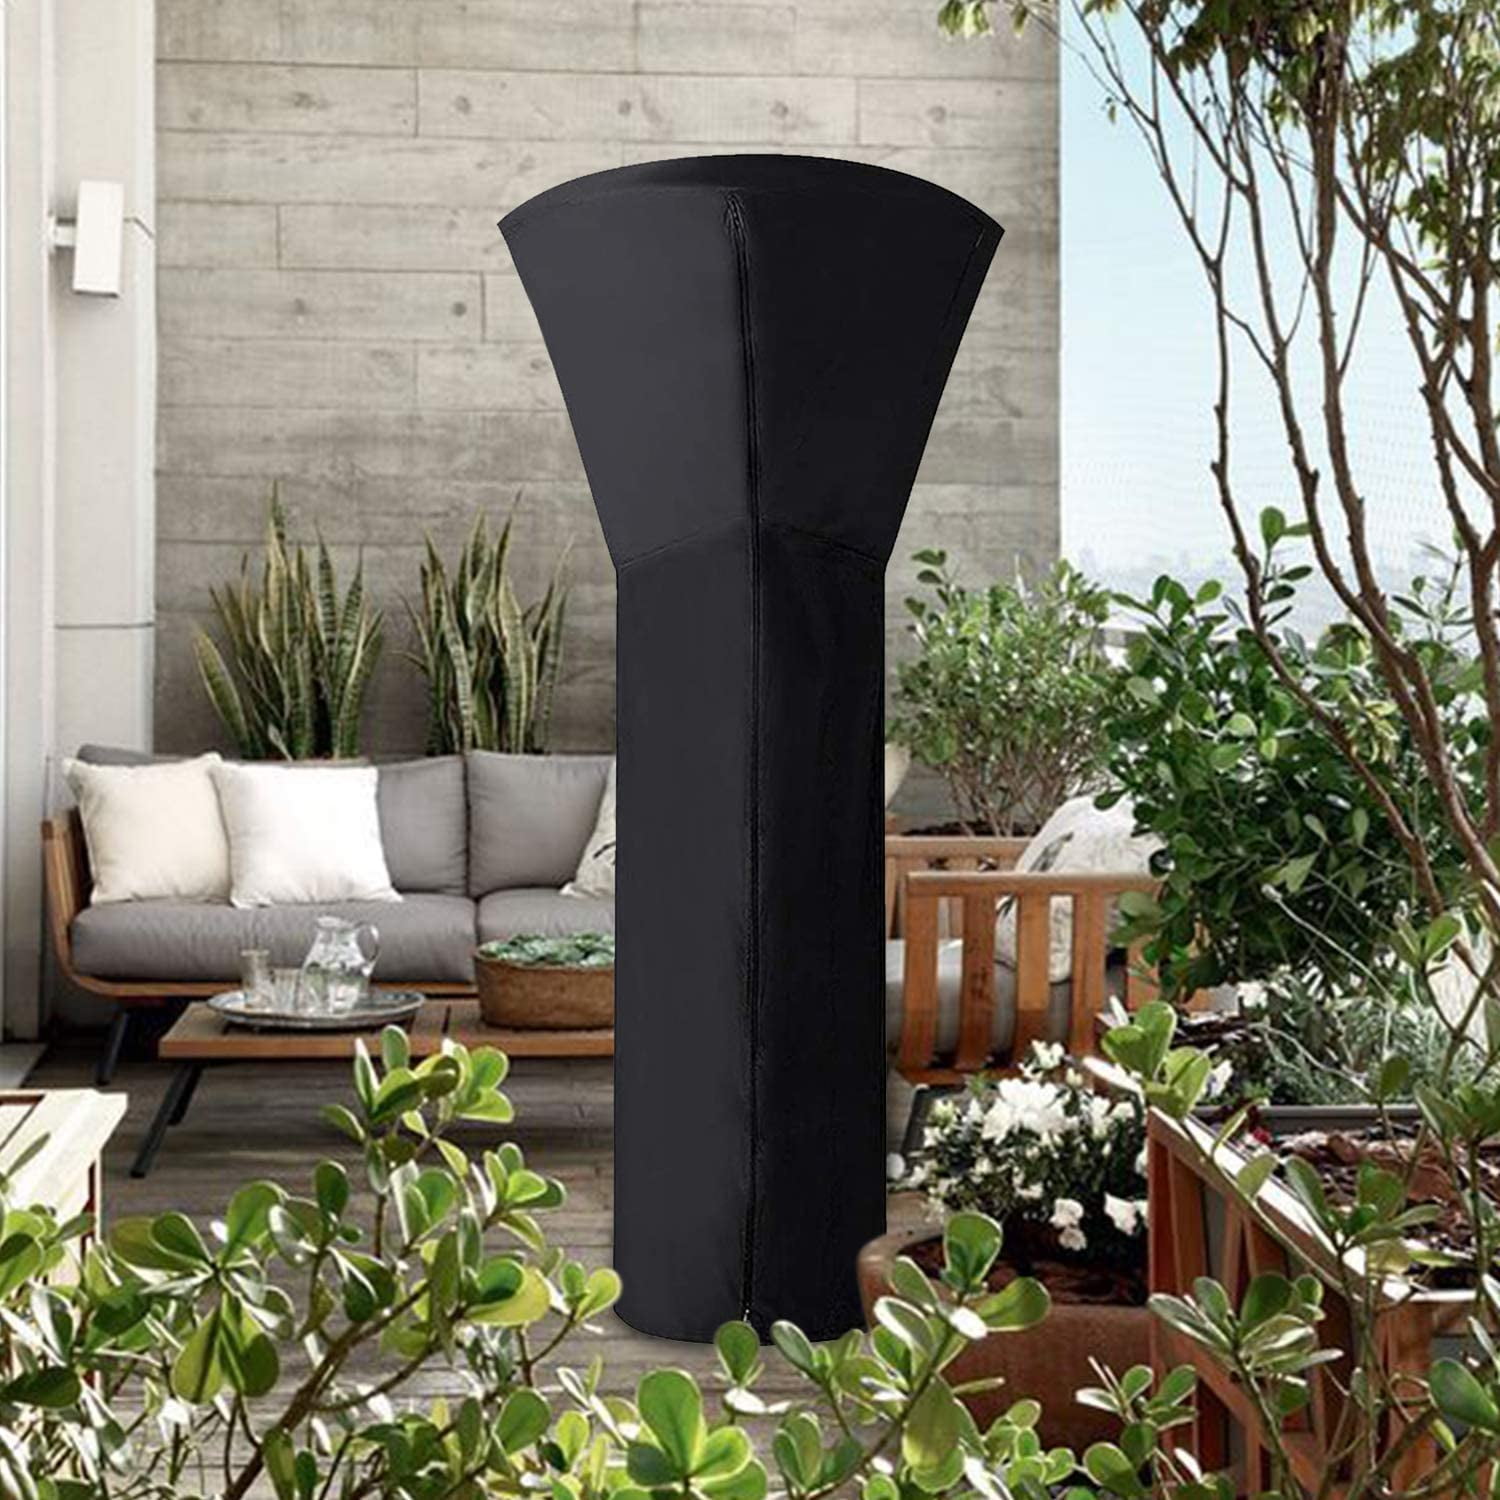 Erato Patio Heater Cover Waterproof UV Protection Windproof Durable 210D Oxford Fabric Outdoor/Indoor Heater Cover with Zipper M 